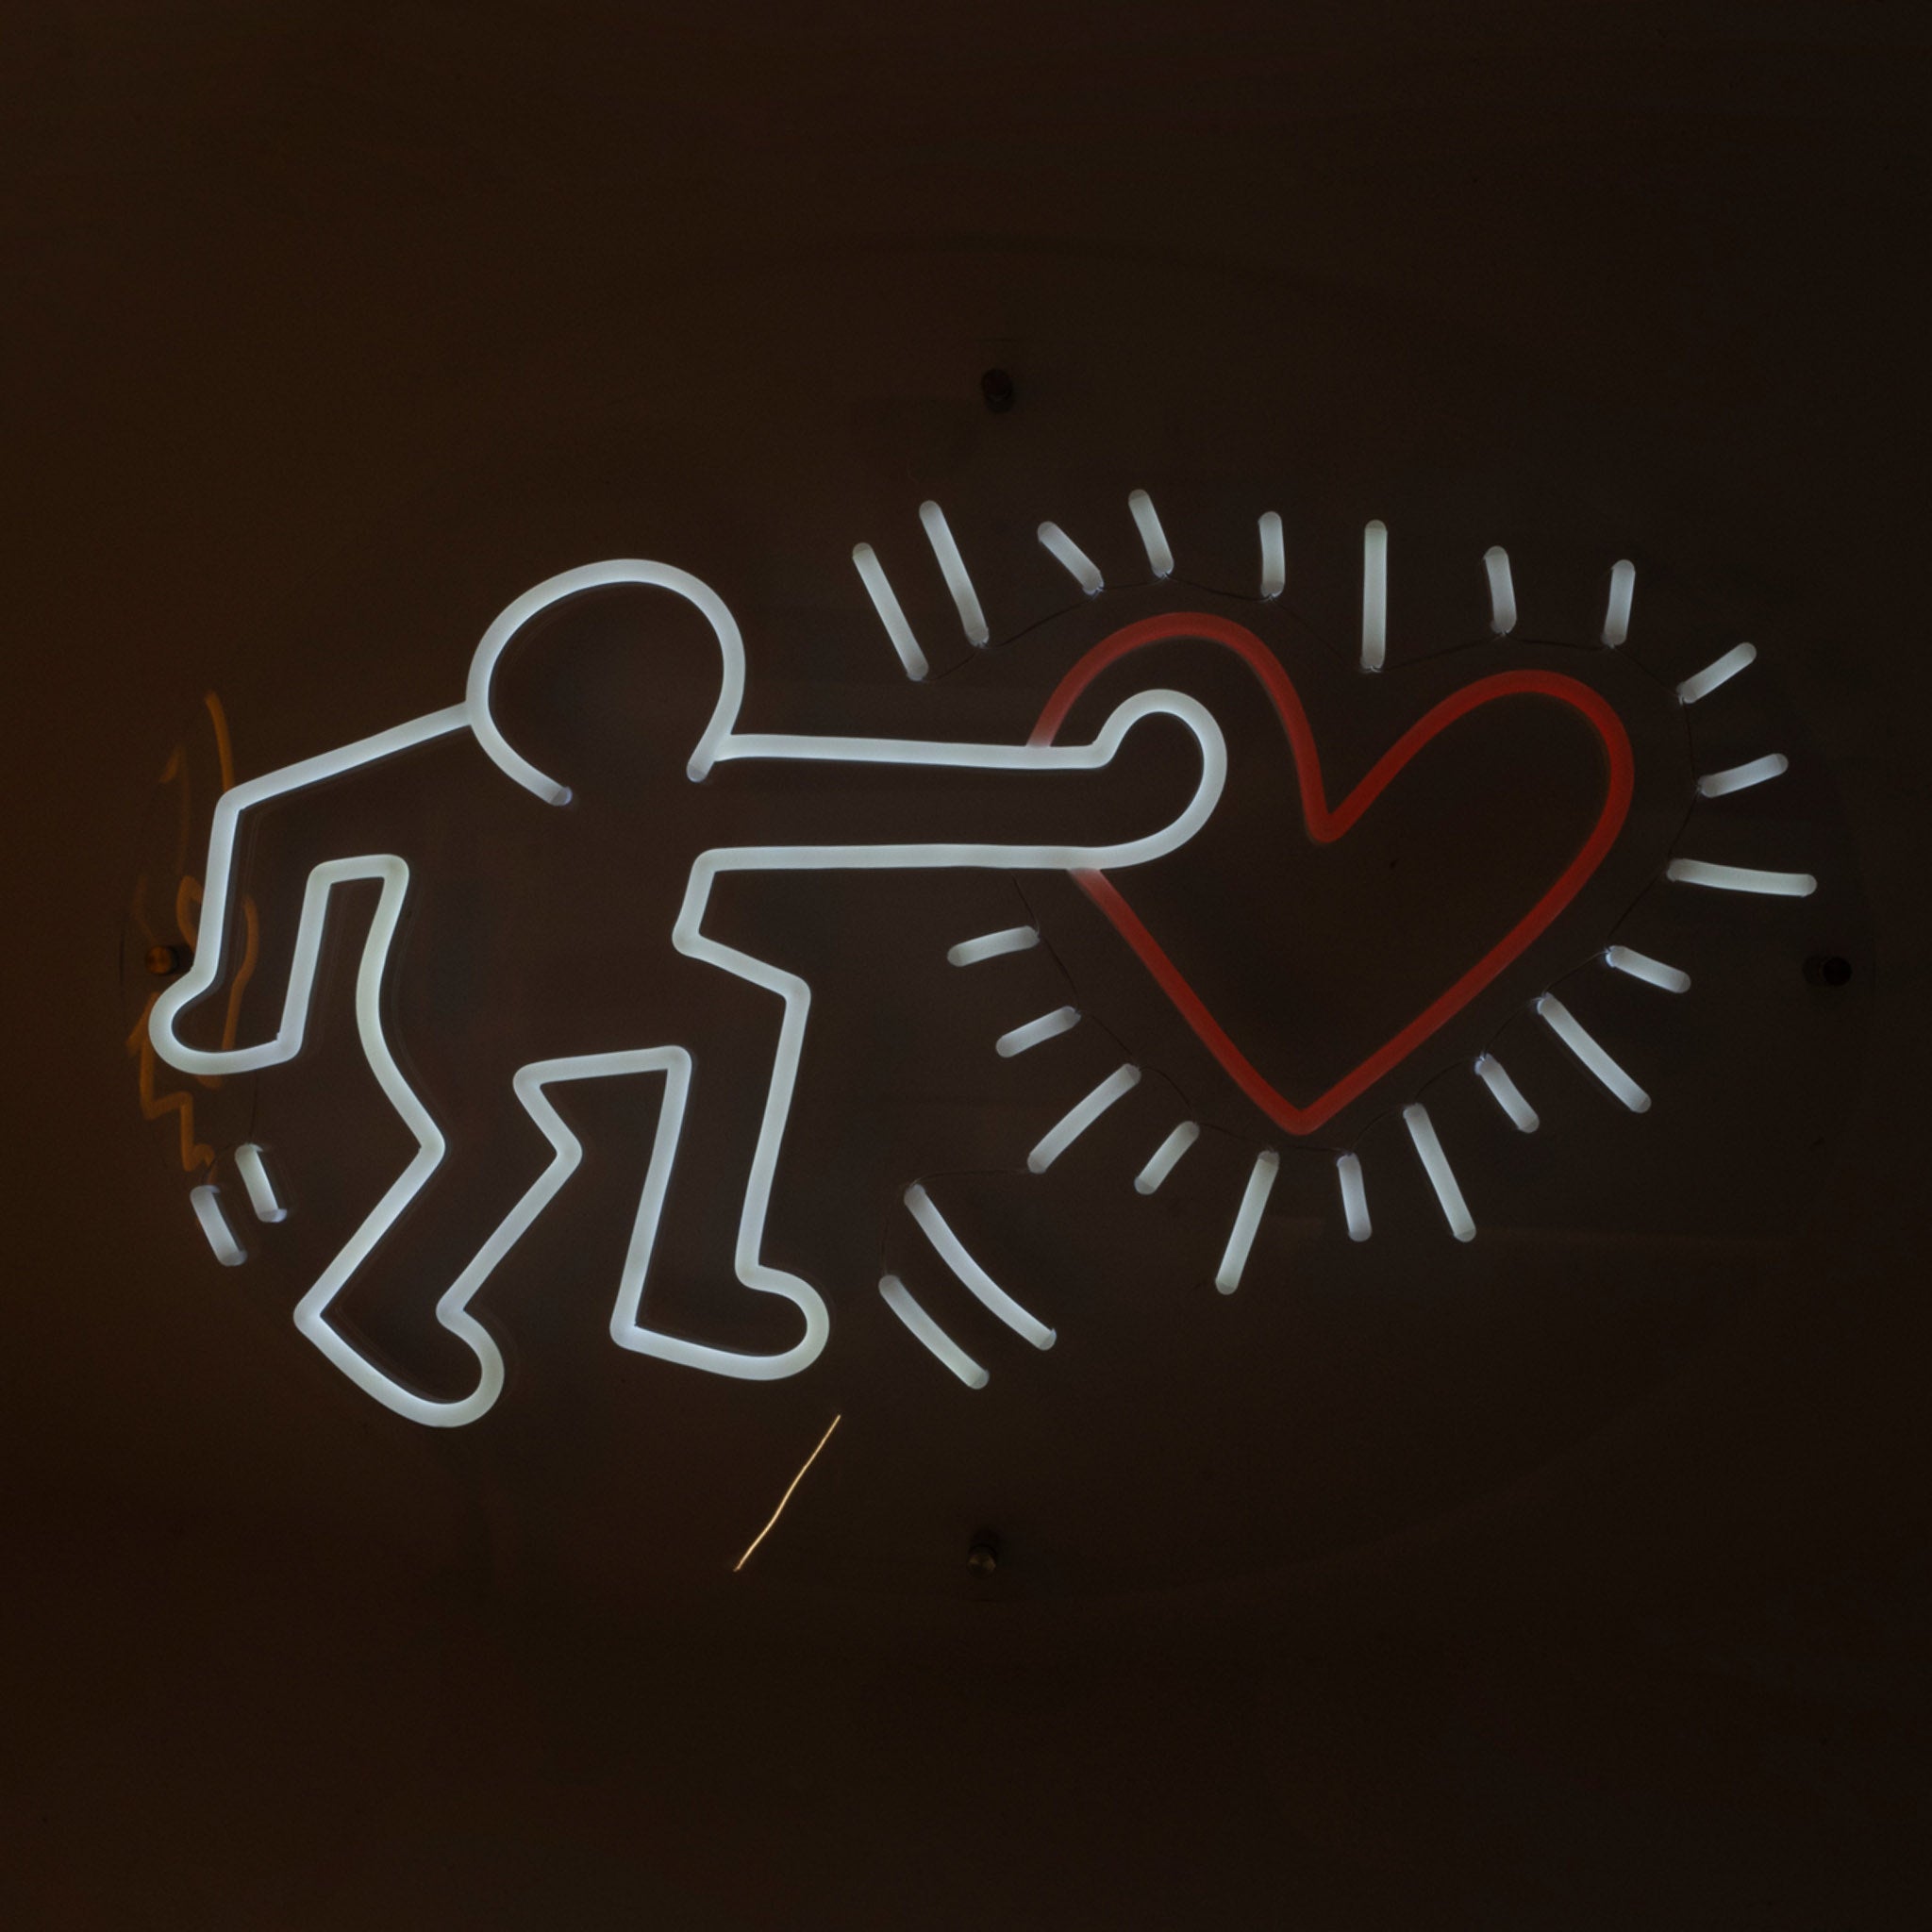 Send Love by Keith Haring - LED Neon Sign